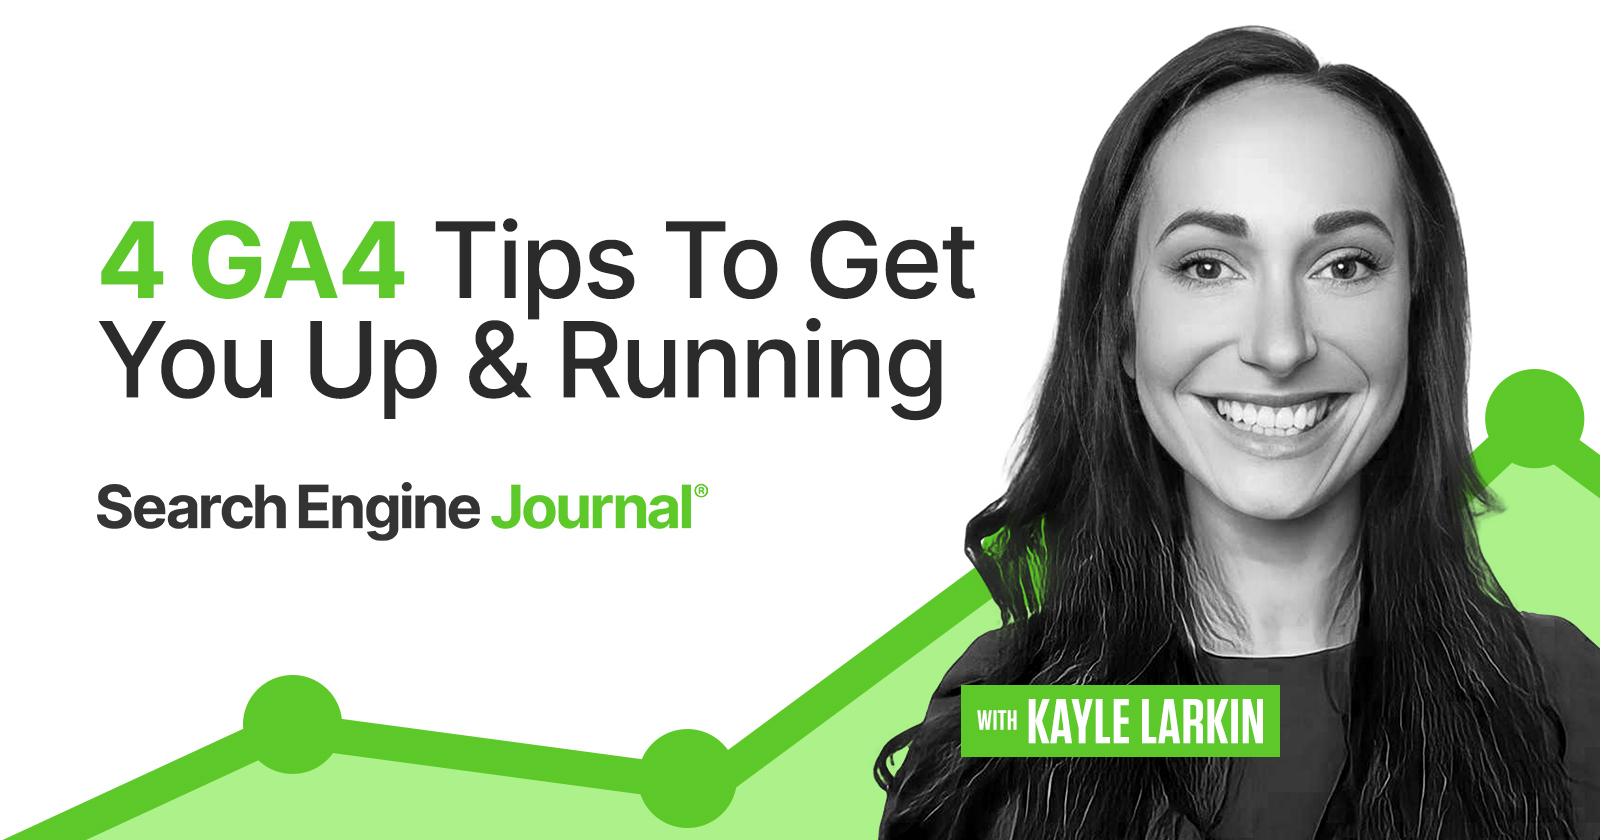 4 GA4 tips to get you up and running, with Kayle Larkin